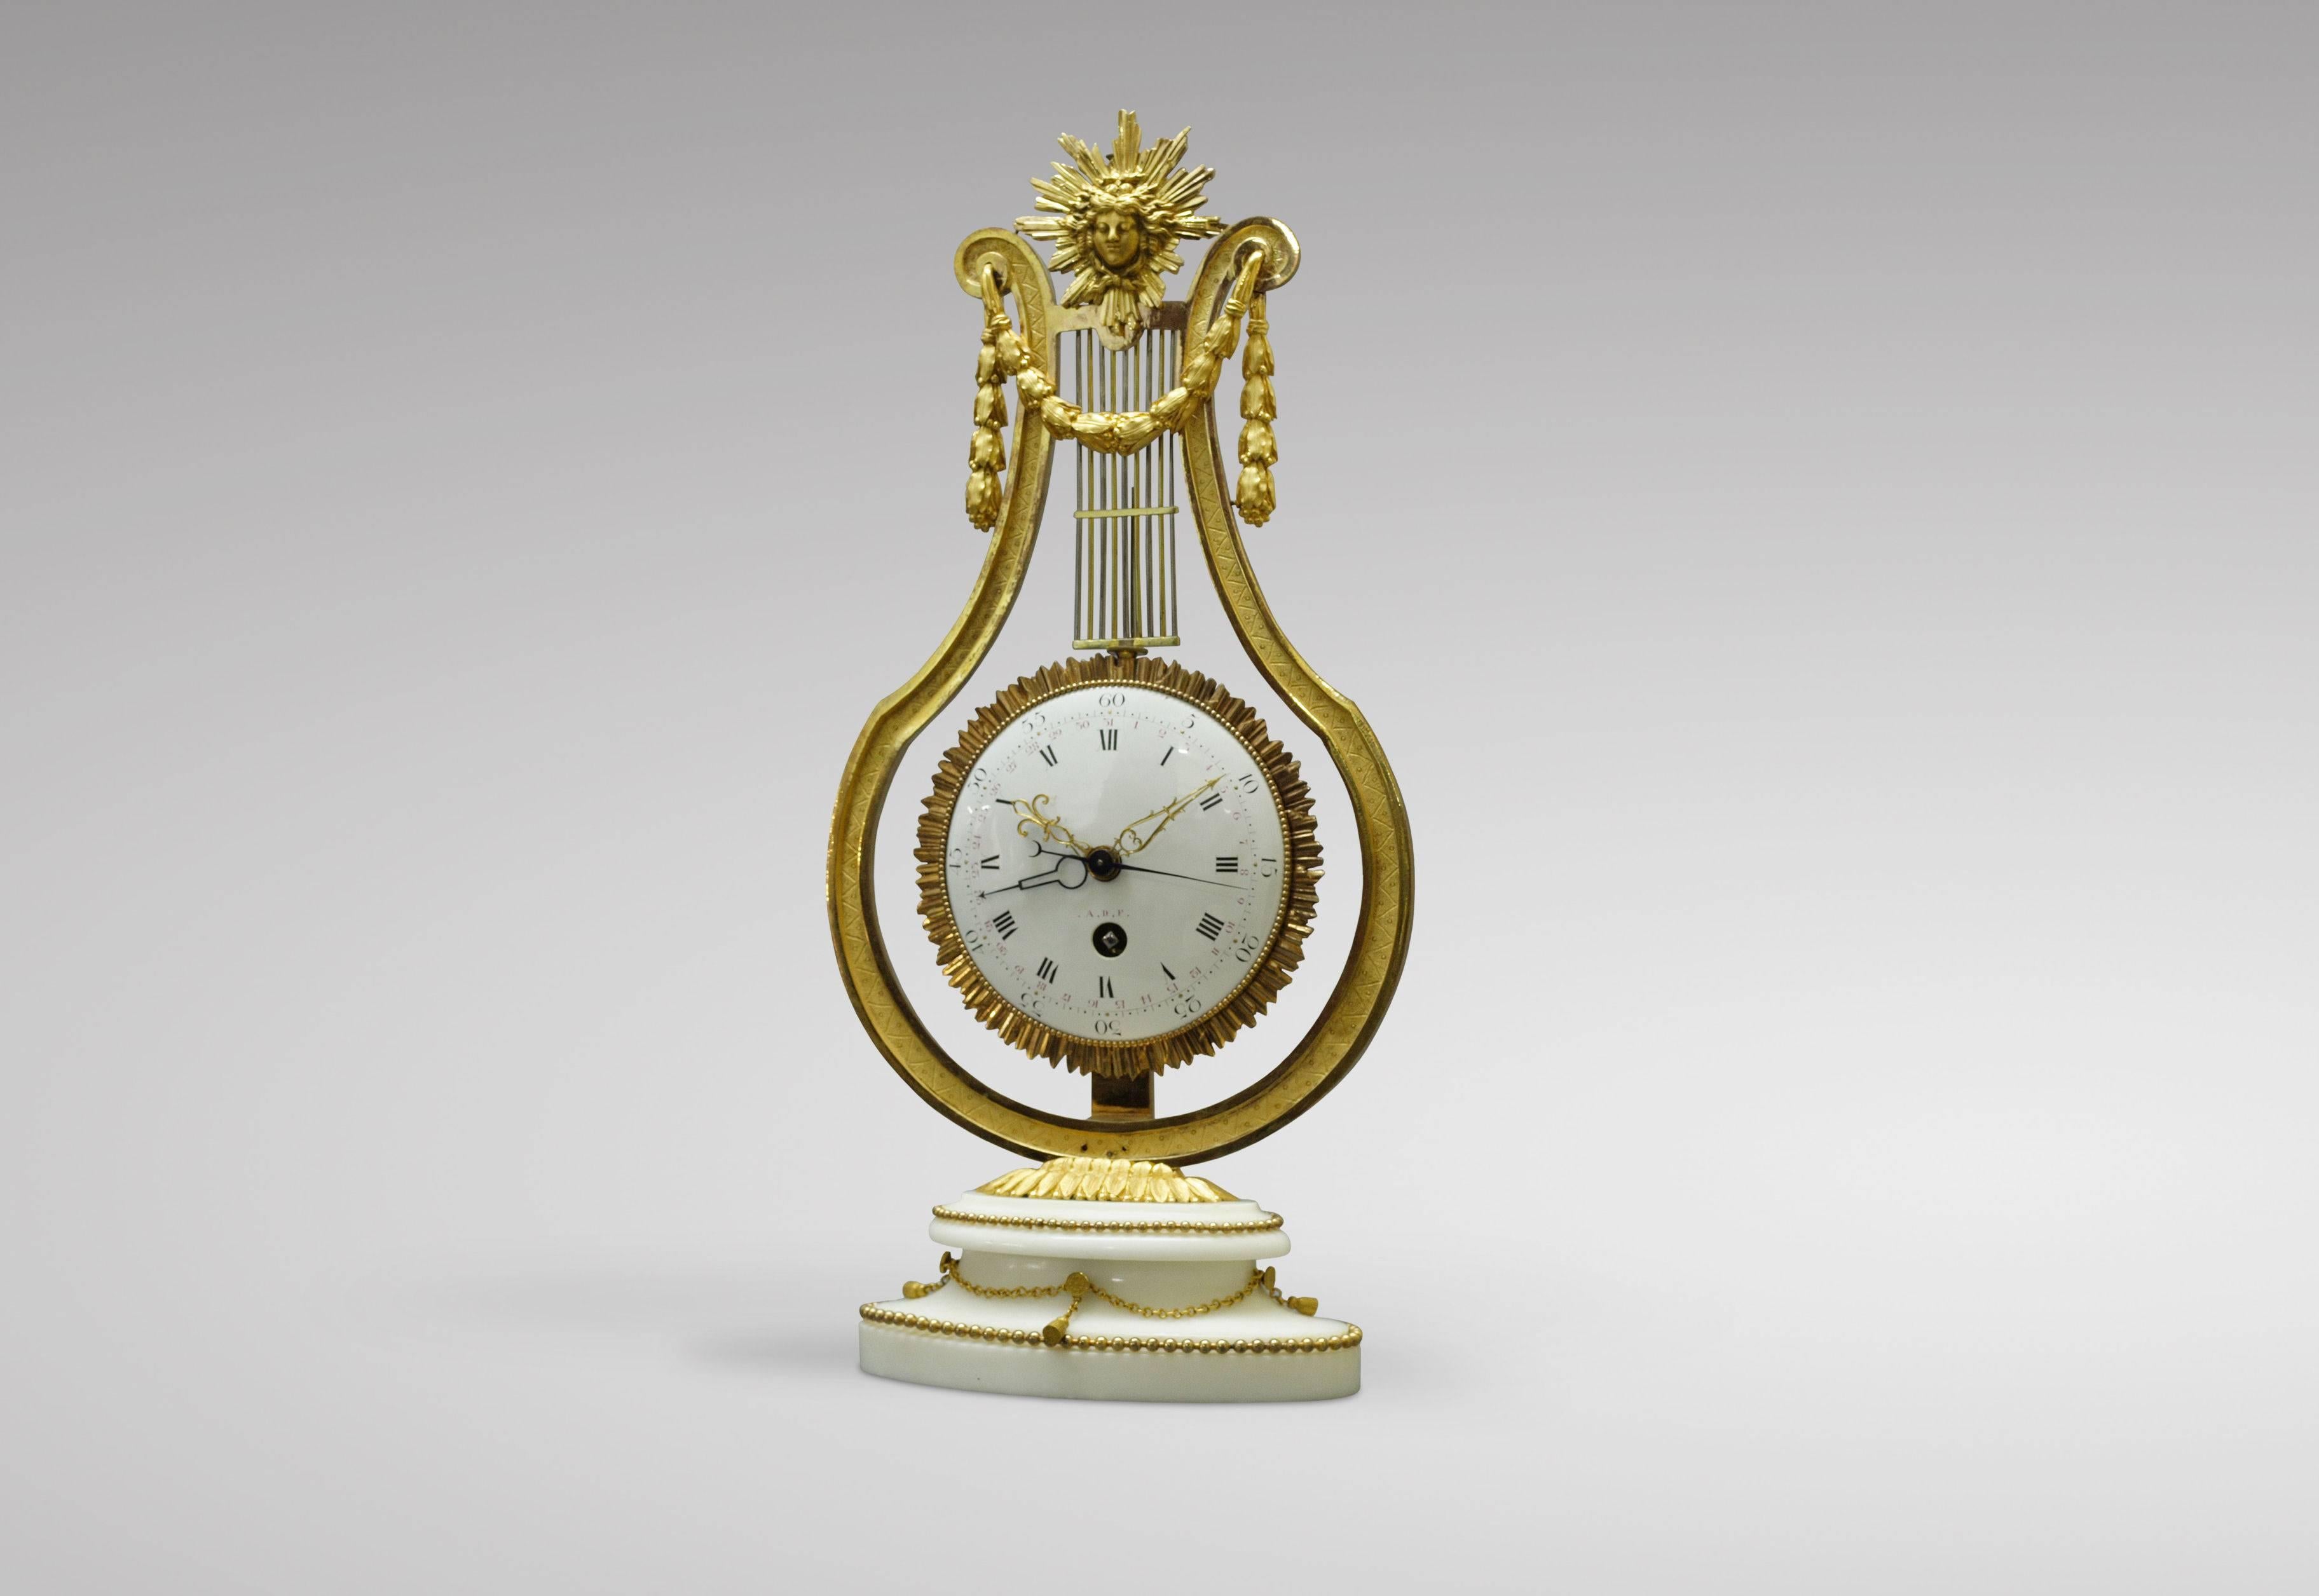 French Louis XVI ormulu and marble mantel timepiece, enamel dial with Roman numerals signed. A.D.F. further calibration for half seconds and date, pierced and engraved gilt hands, blued sweep seconds and date pointer, movement with pinwheel